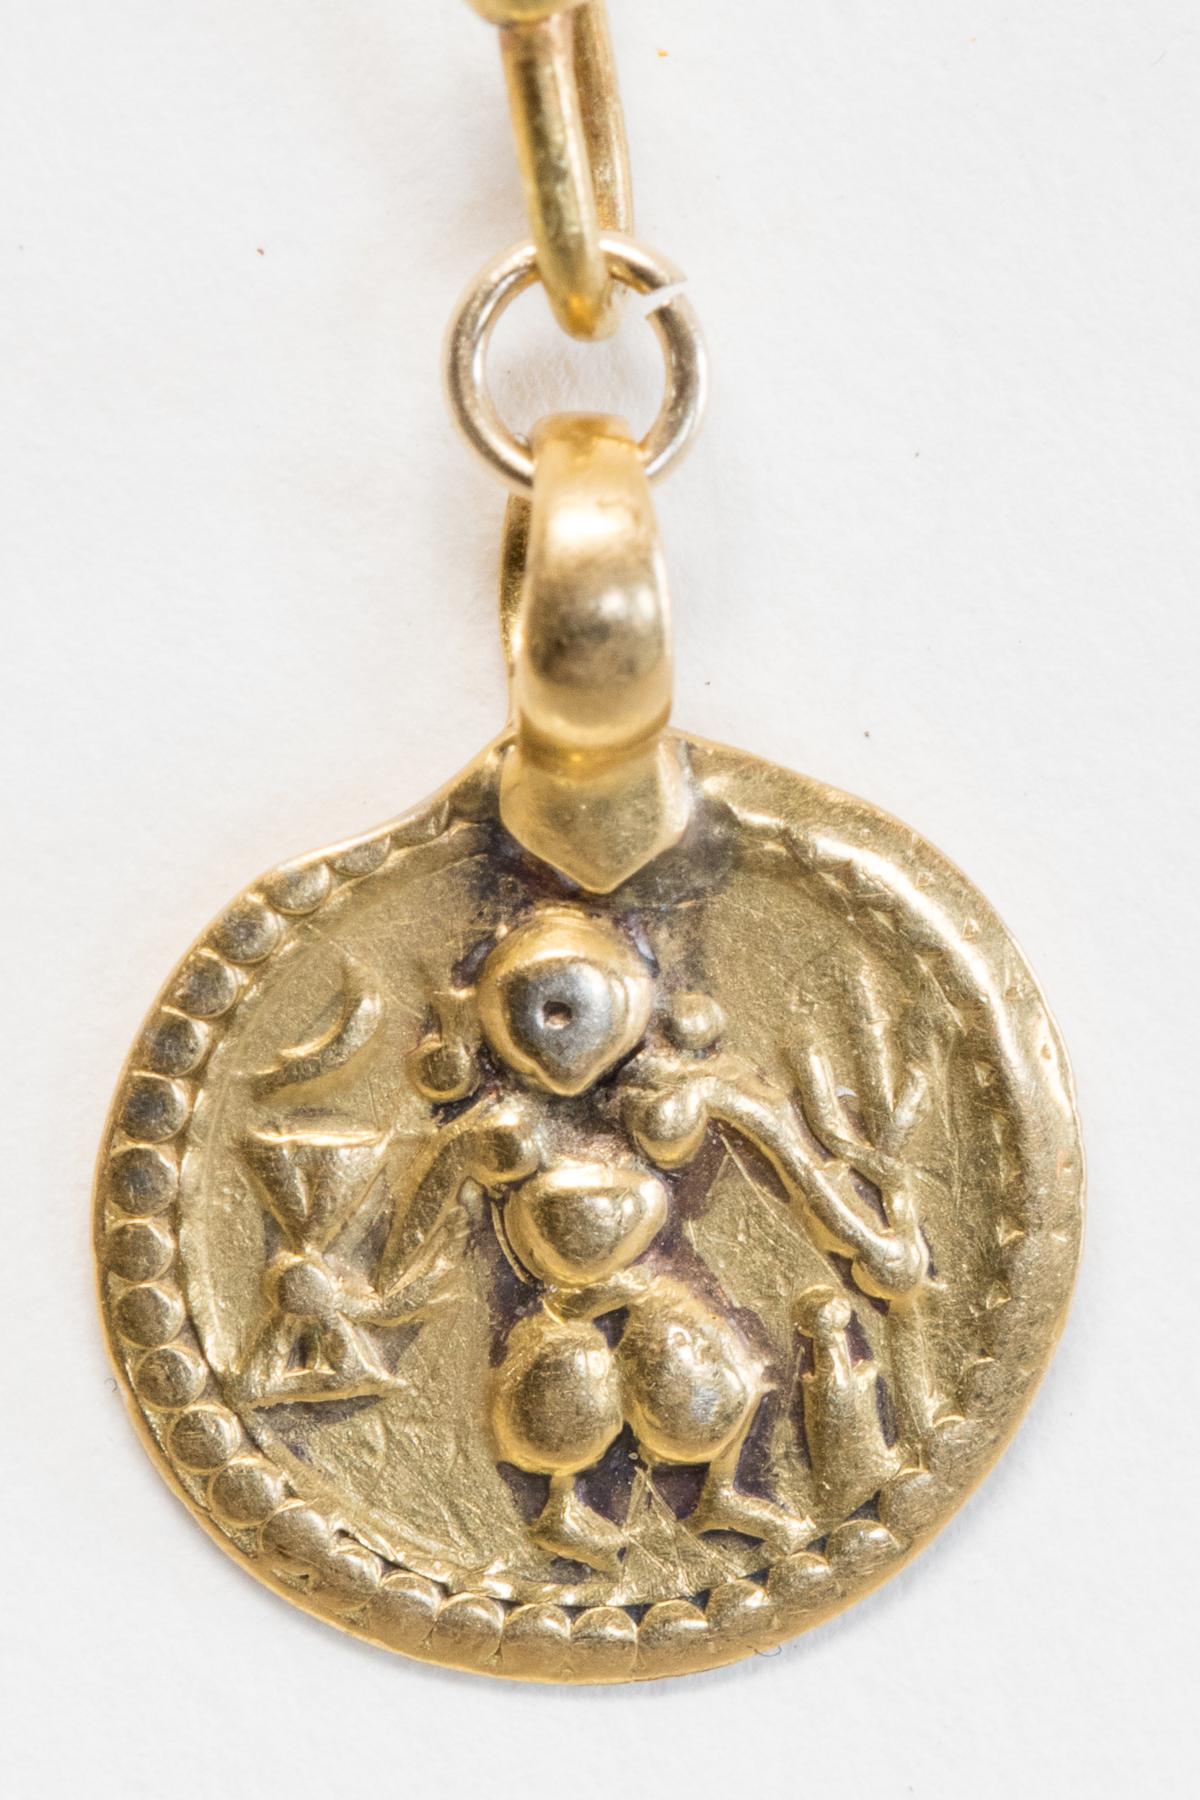 Pair of 22K gold pendants of two Hindu dieties--Hunuman and Durga.  Old pendants converted to earrings with a french wire, for pierced ears.